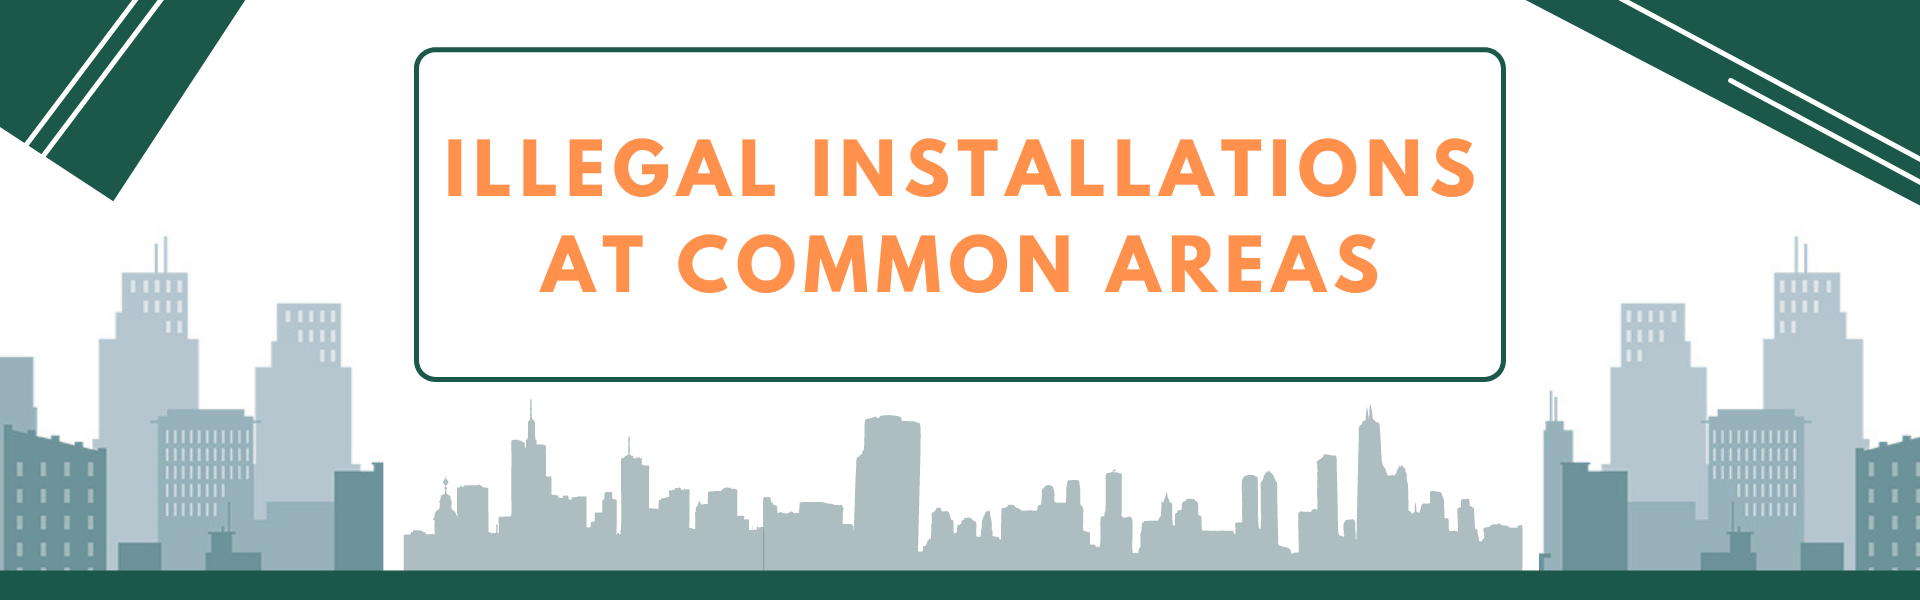 Illegal Installations at Common Areas